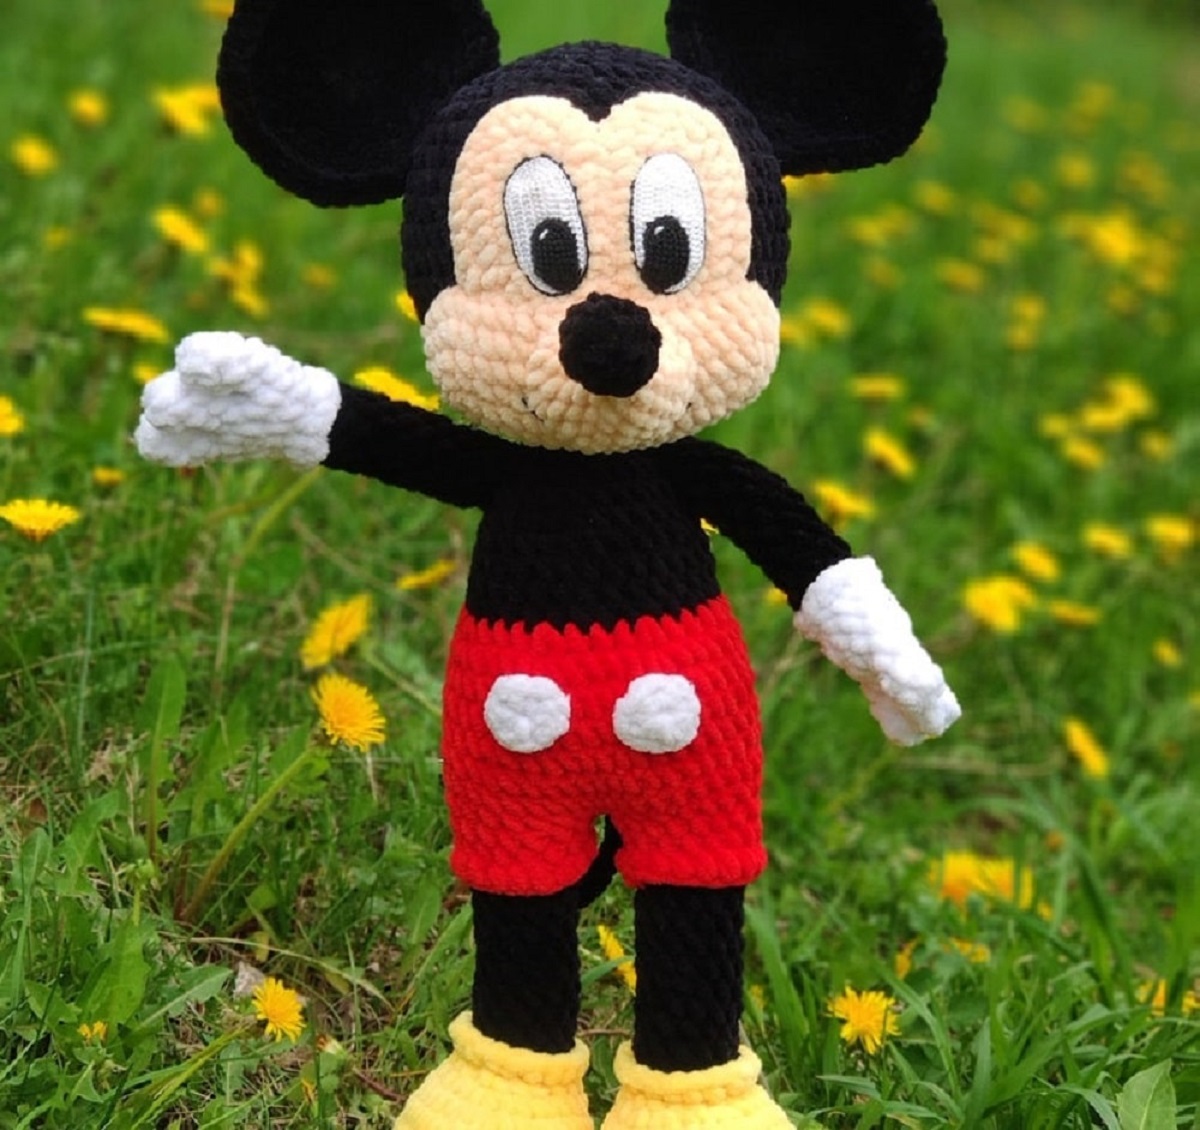 Stuffed crochet Mickey Mouse wearing red and white shorts and yellow shoes standing with one arm raised on some grass.